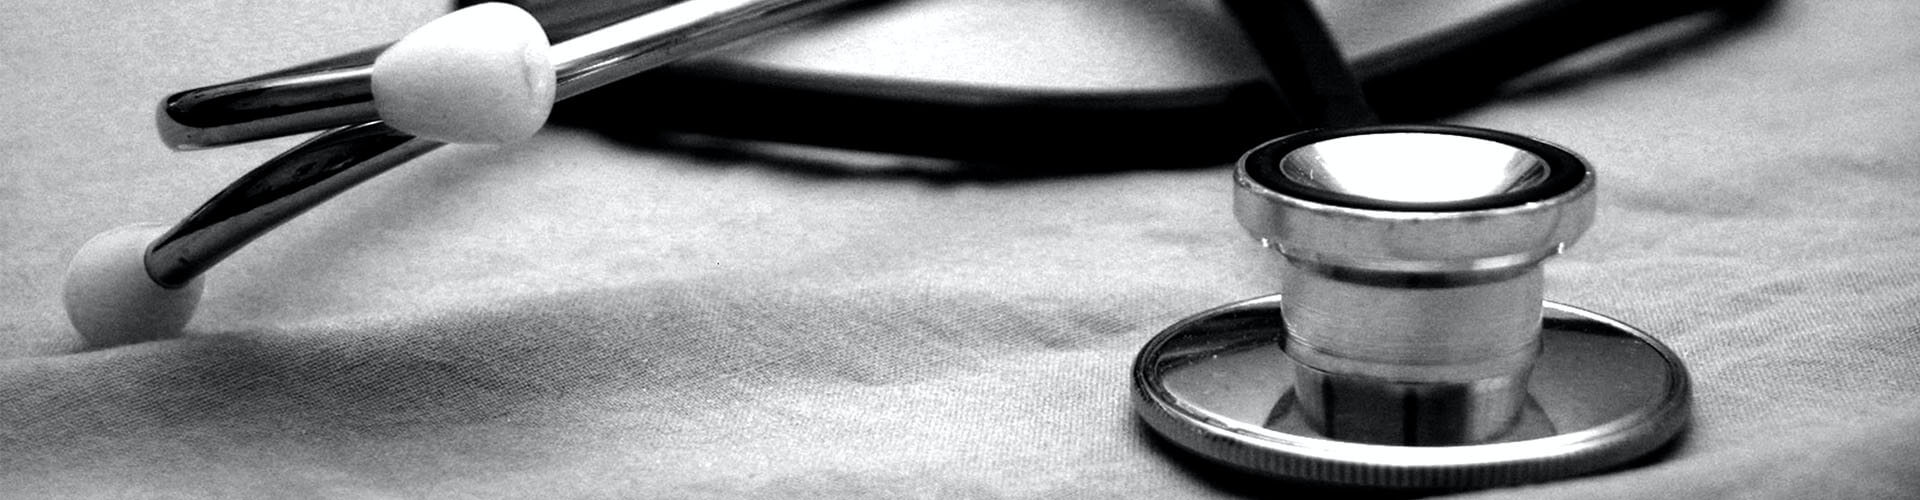 stethoscope in black and white 